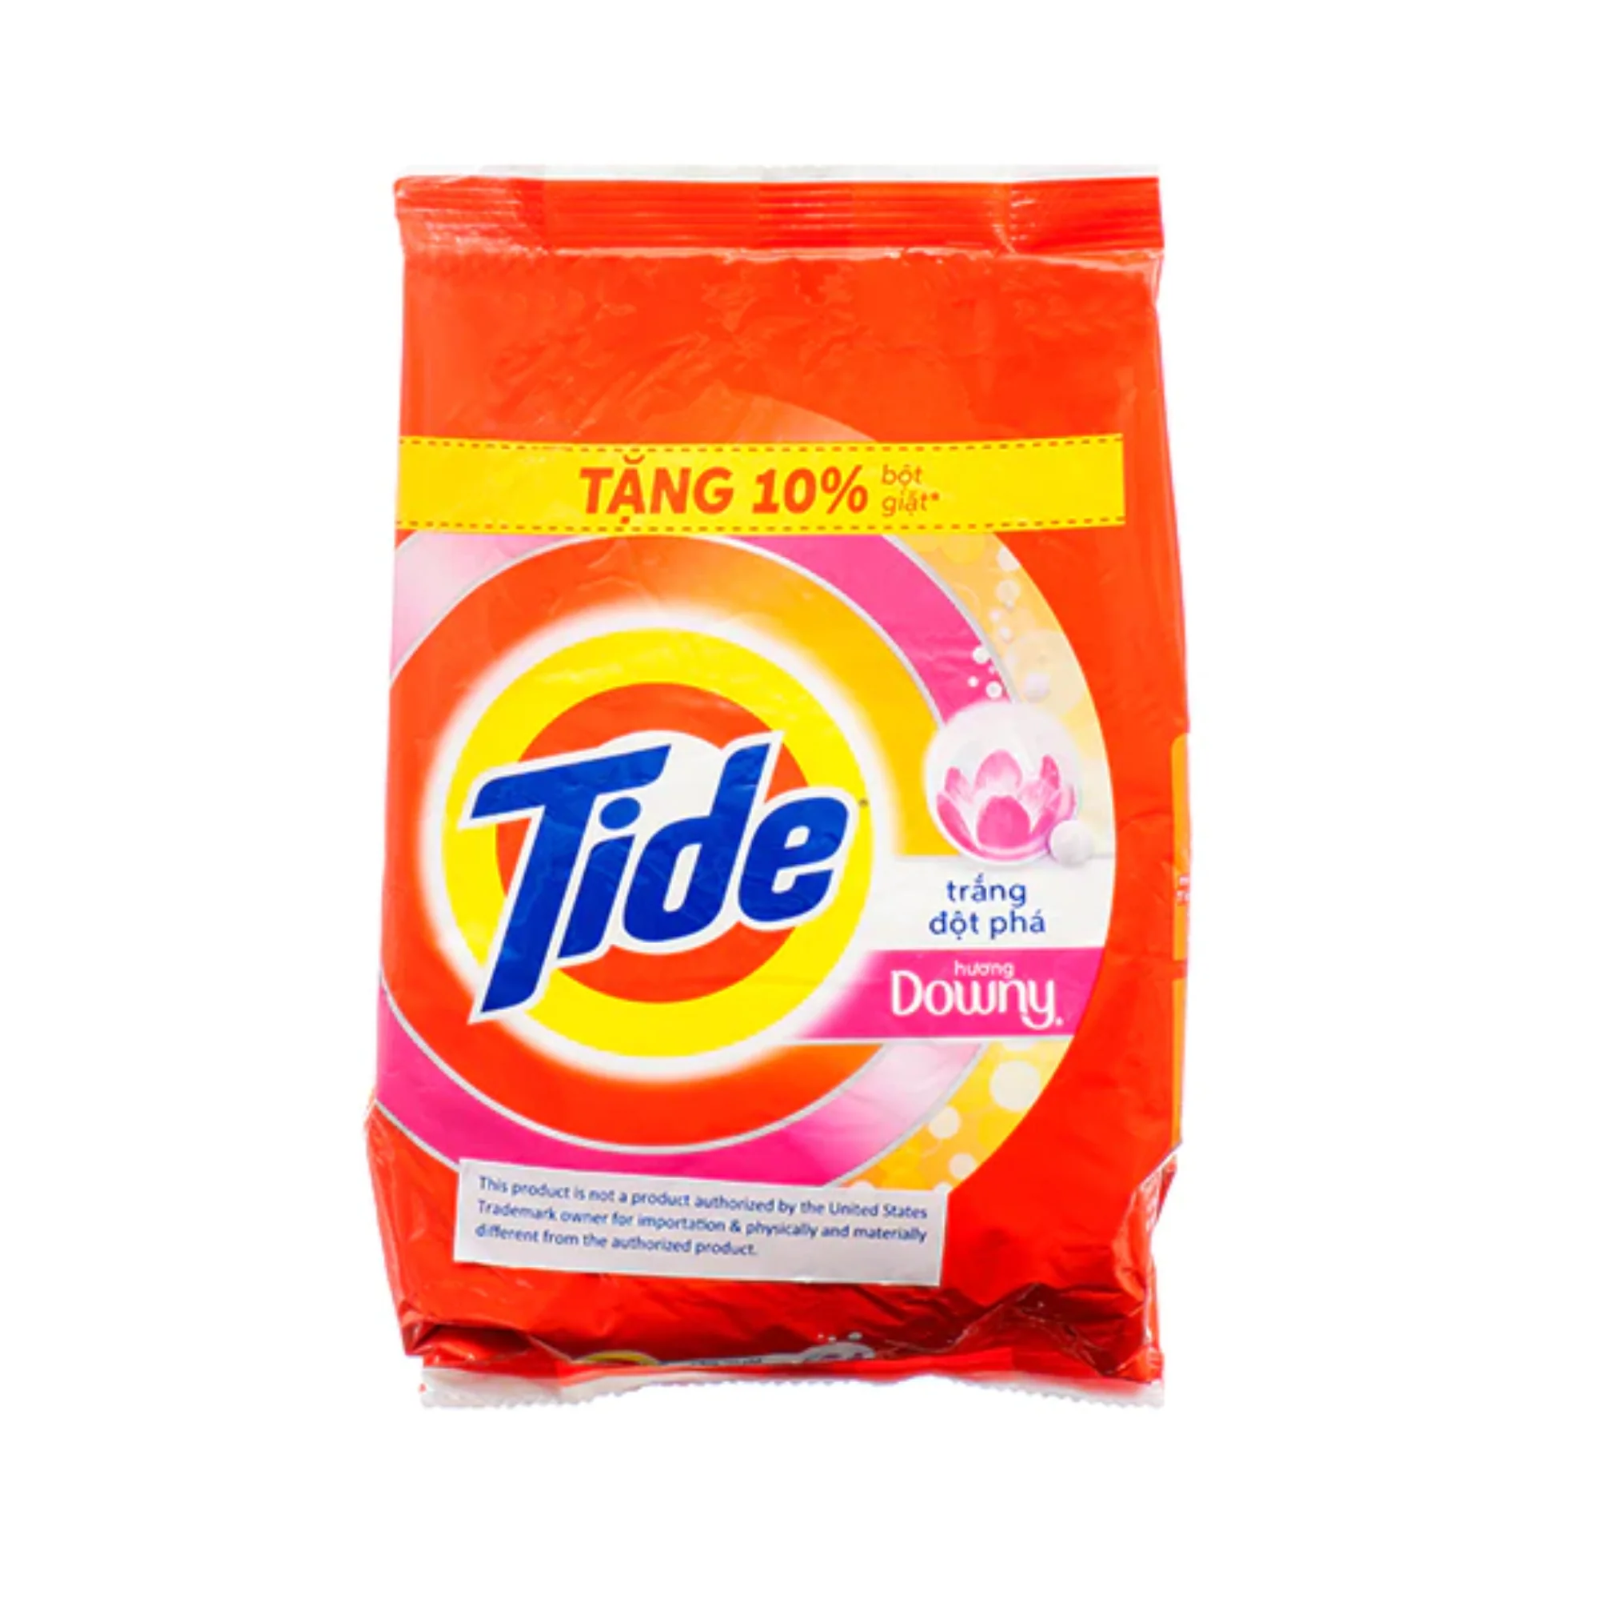 Tide - Powder Laundry Detergent w/Downy, 690g  - Pack of 18